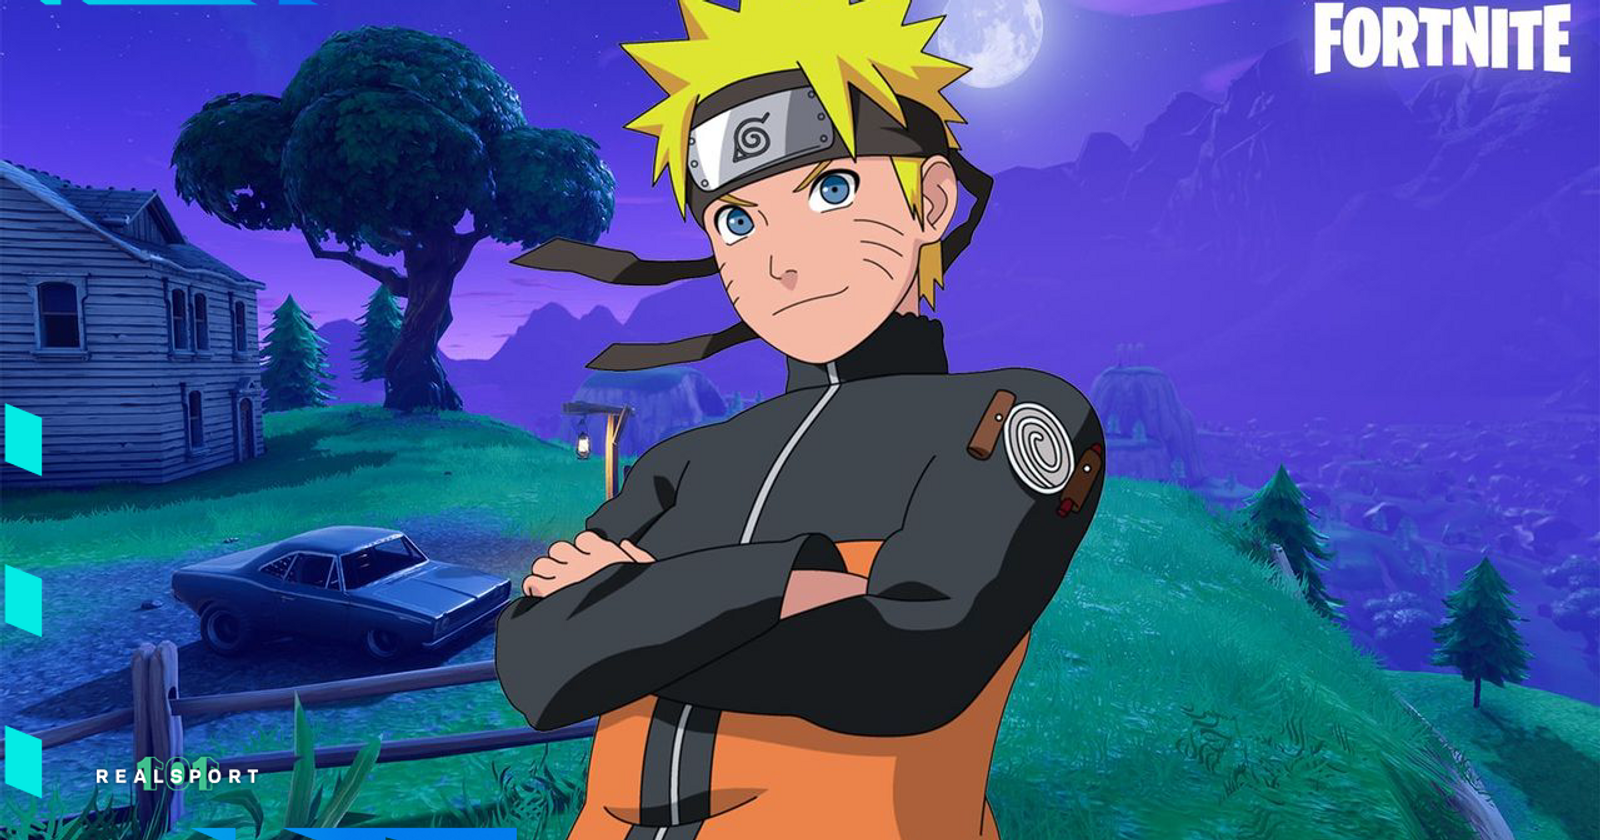 How to unlock Naruto in Fortnite – everything you need to know about the  Fortnite x Naruto crossover